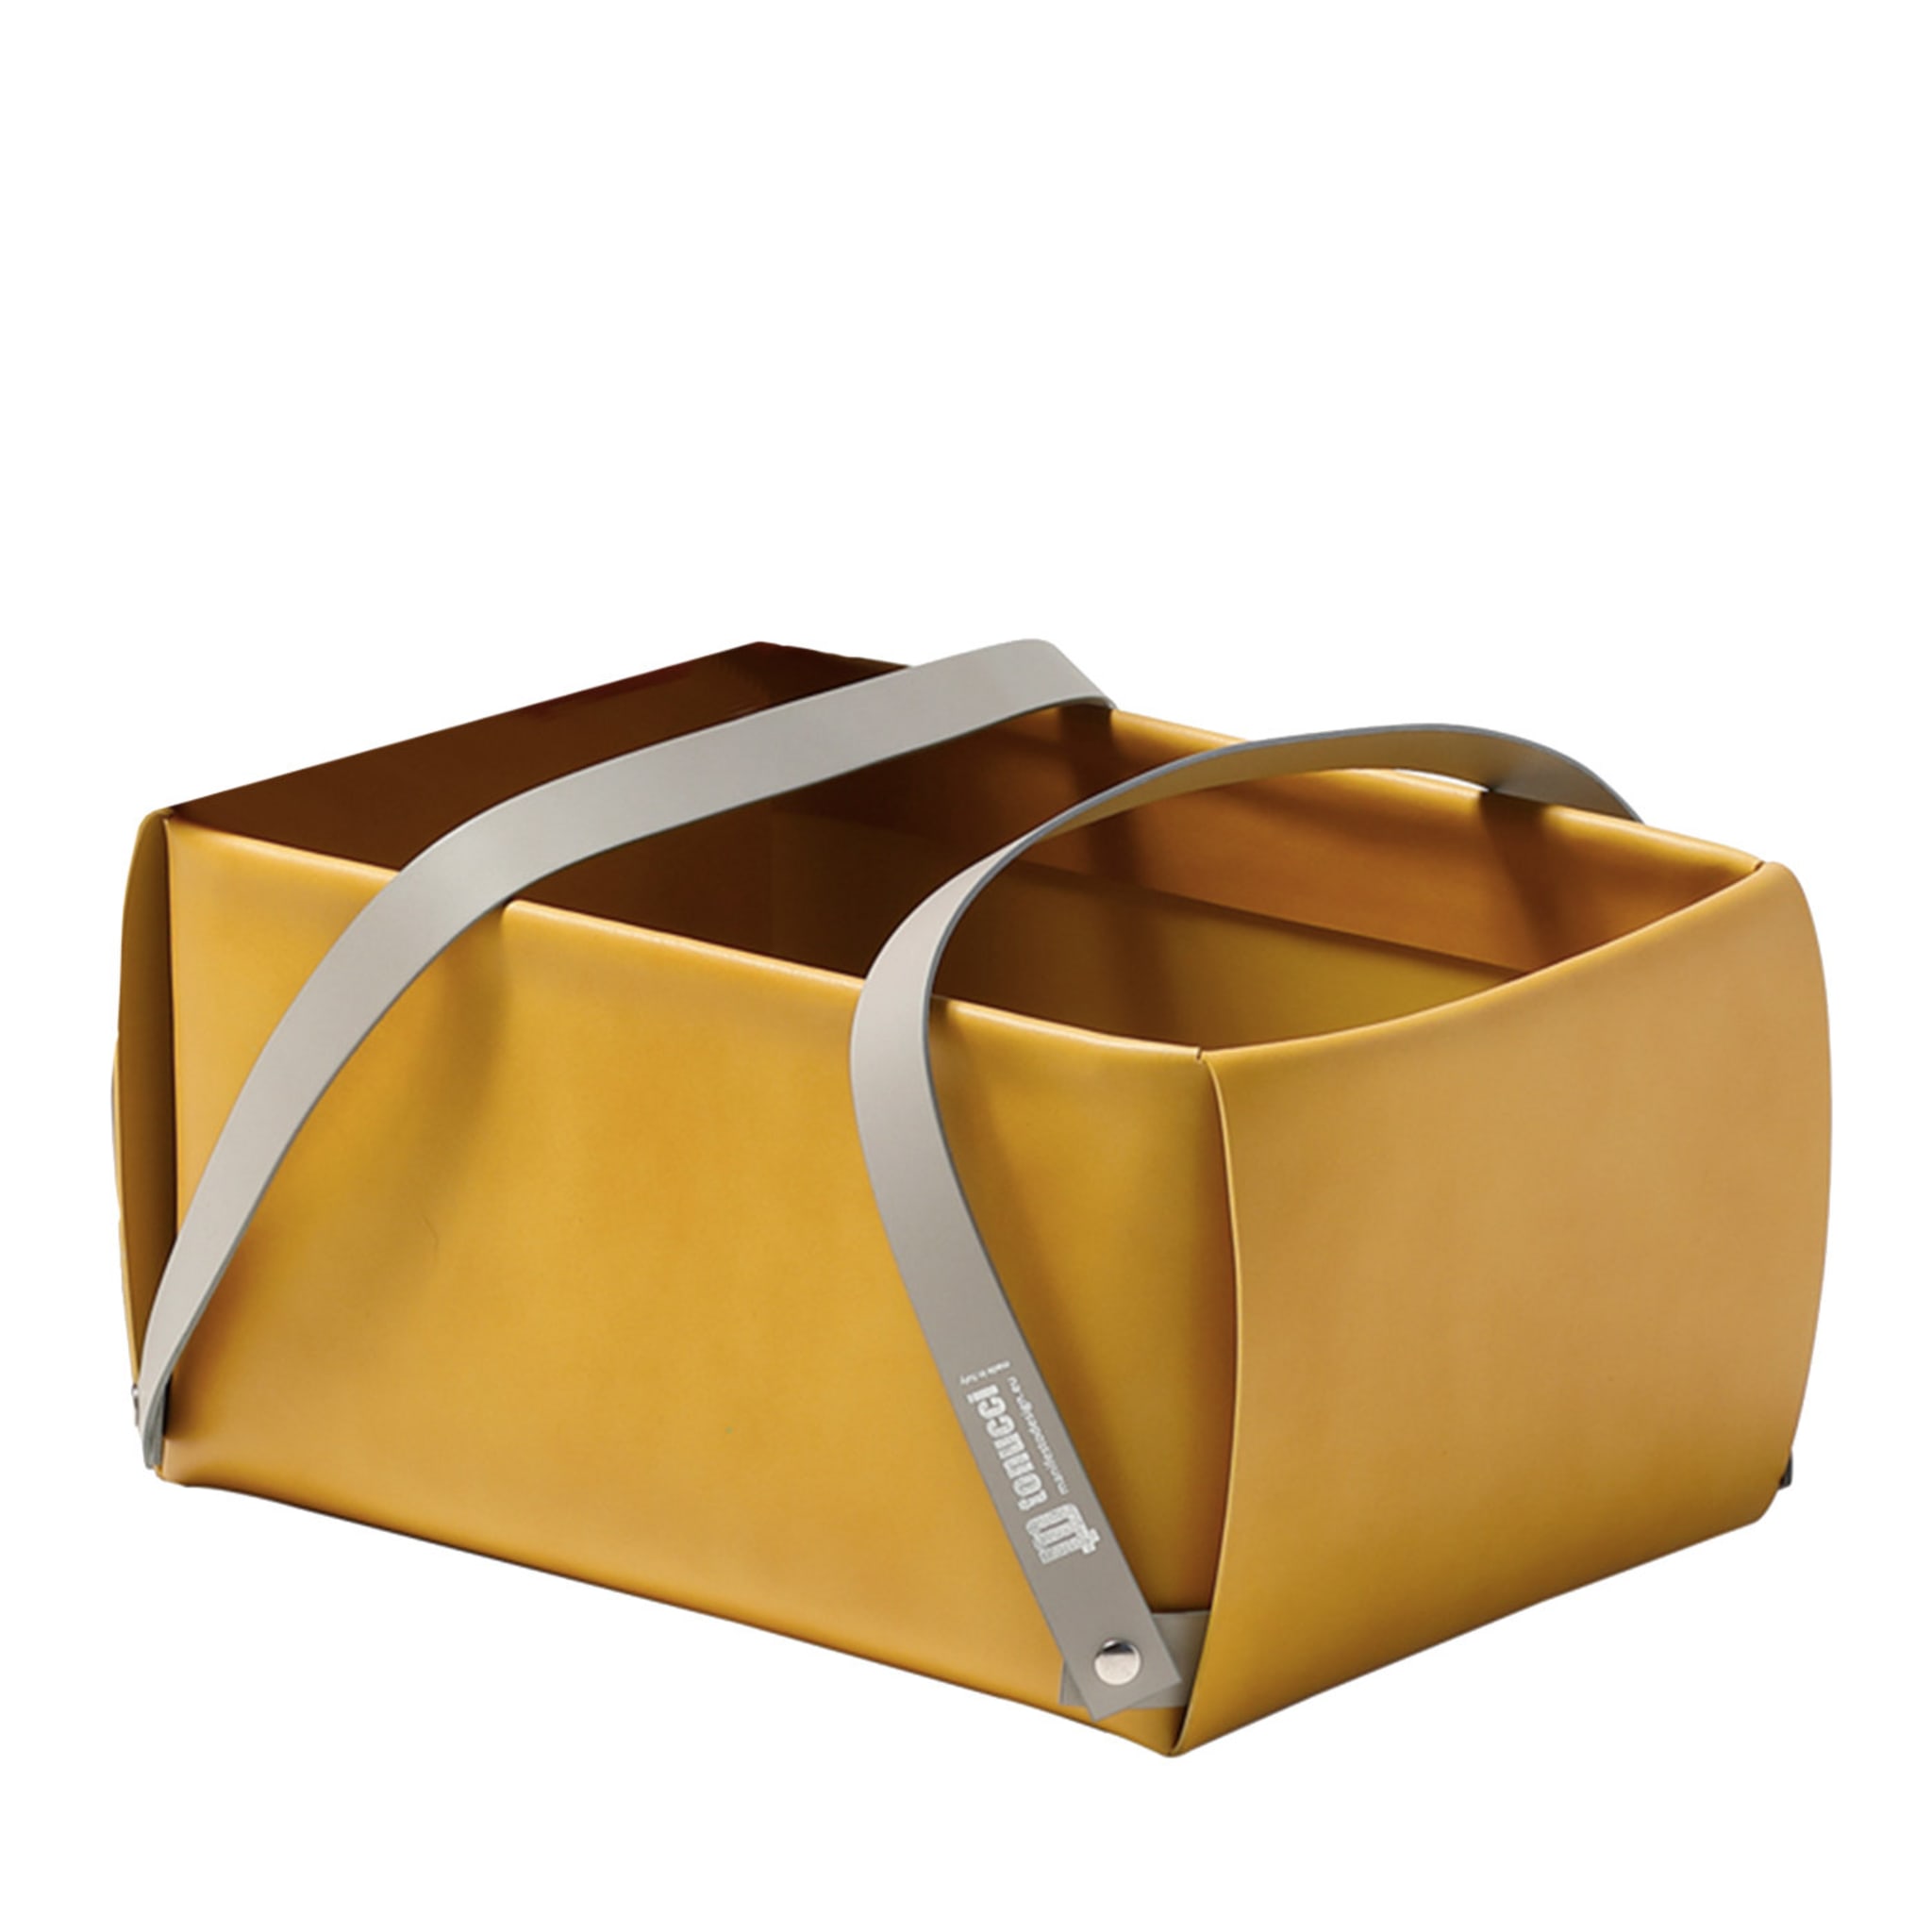 Lullabao Yellow Leather Basket with Handles by Viola Tonucci - Main view